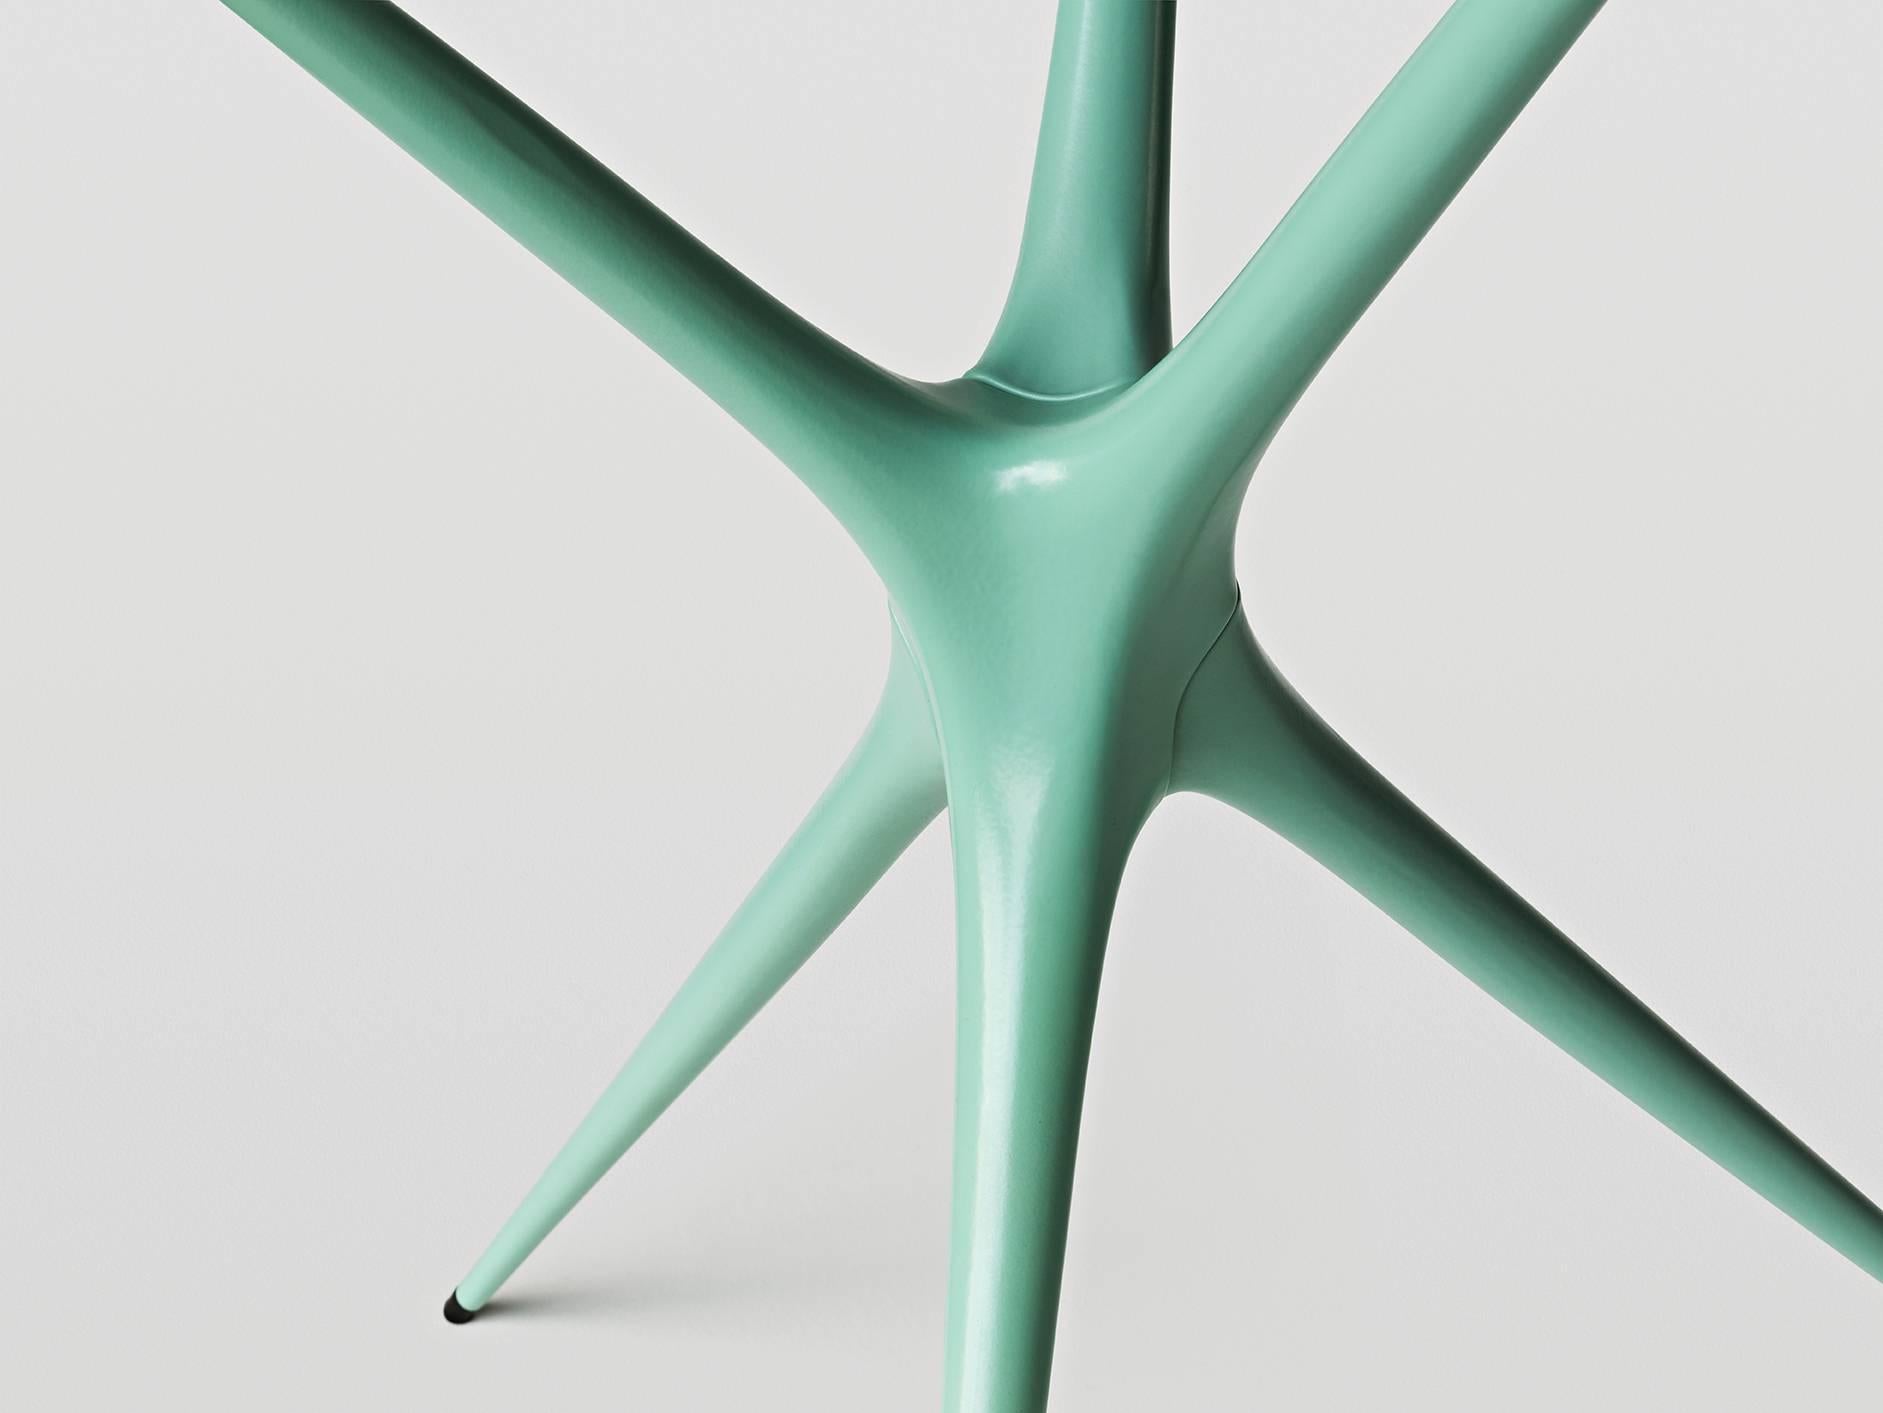 British Supernova, Recycled Cast Aluminum Table Leg in Seagreen by Made in Ratio For Sale